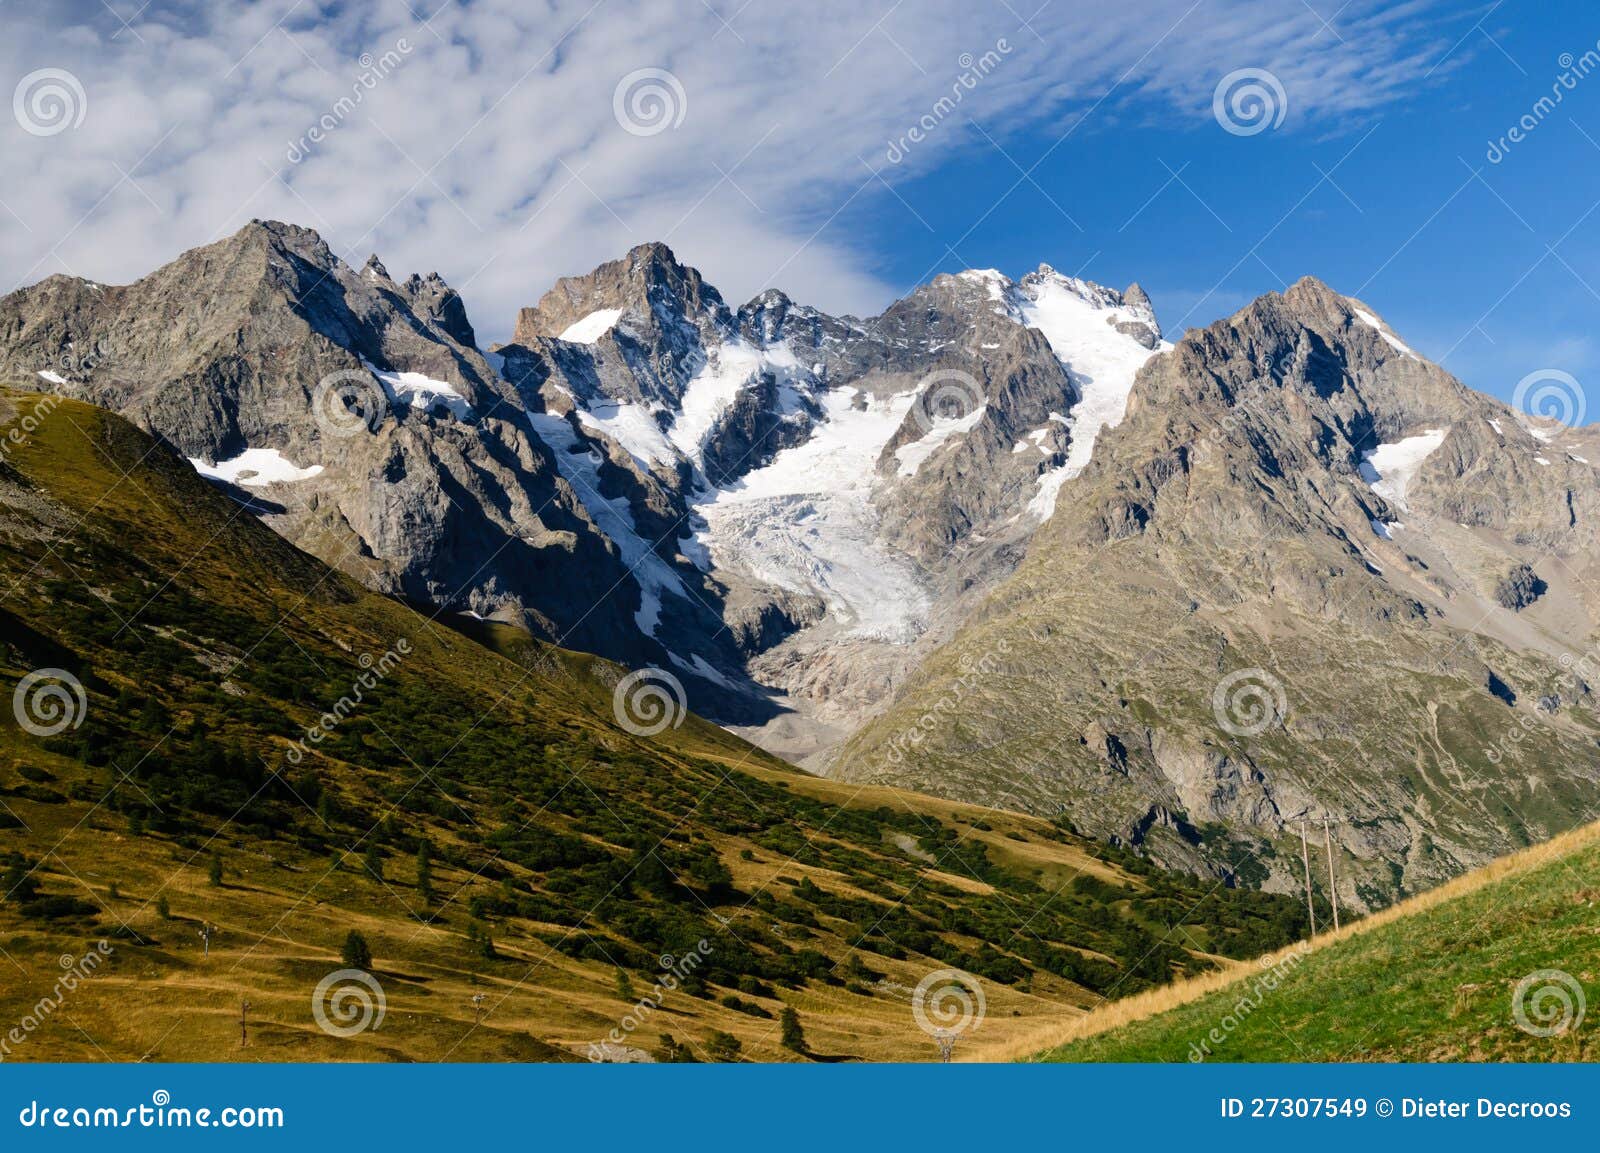 magnificent view on glaciers of ecrins